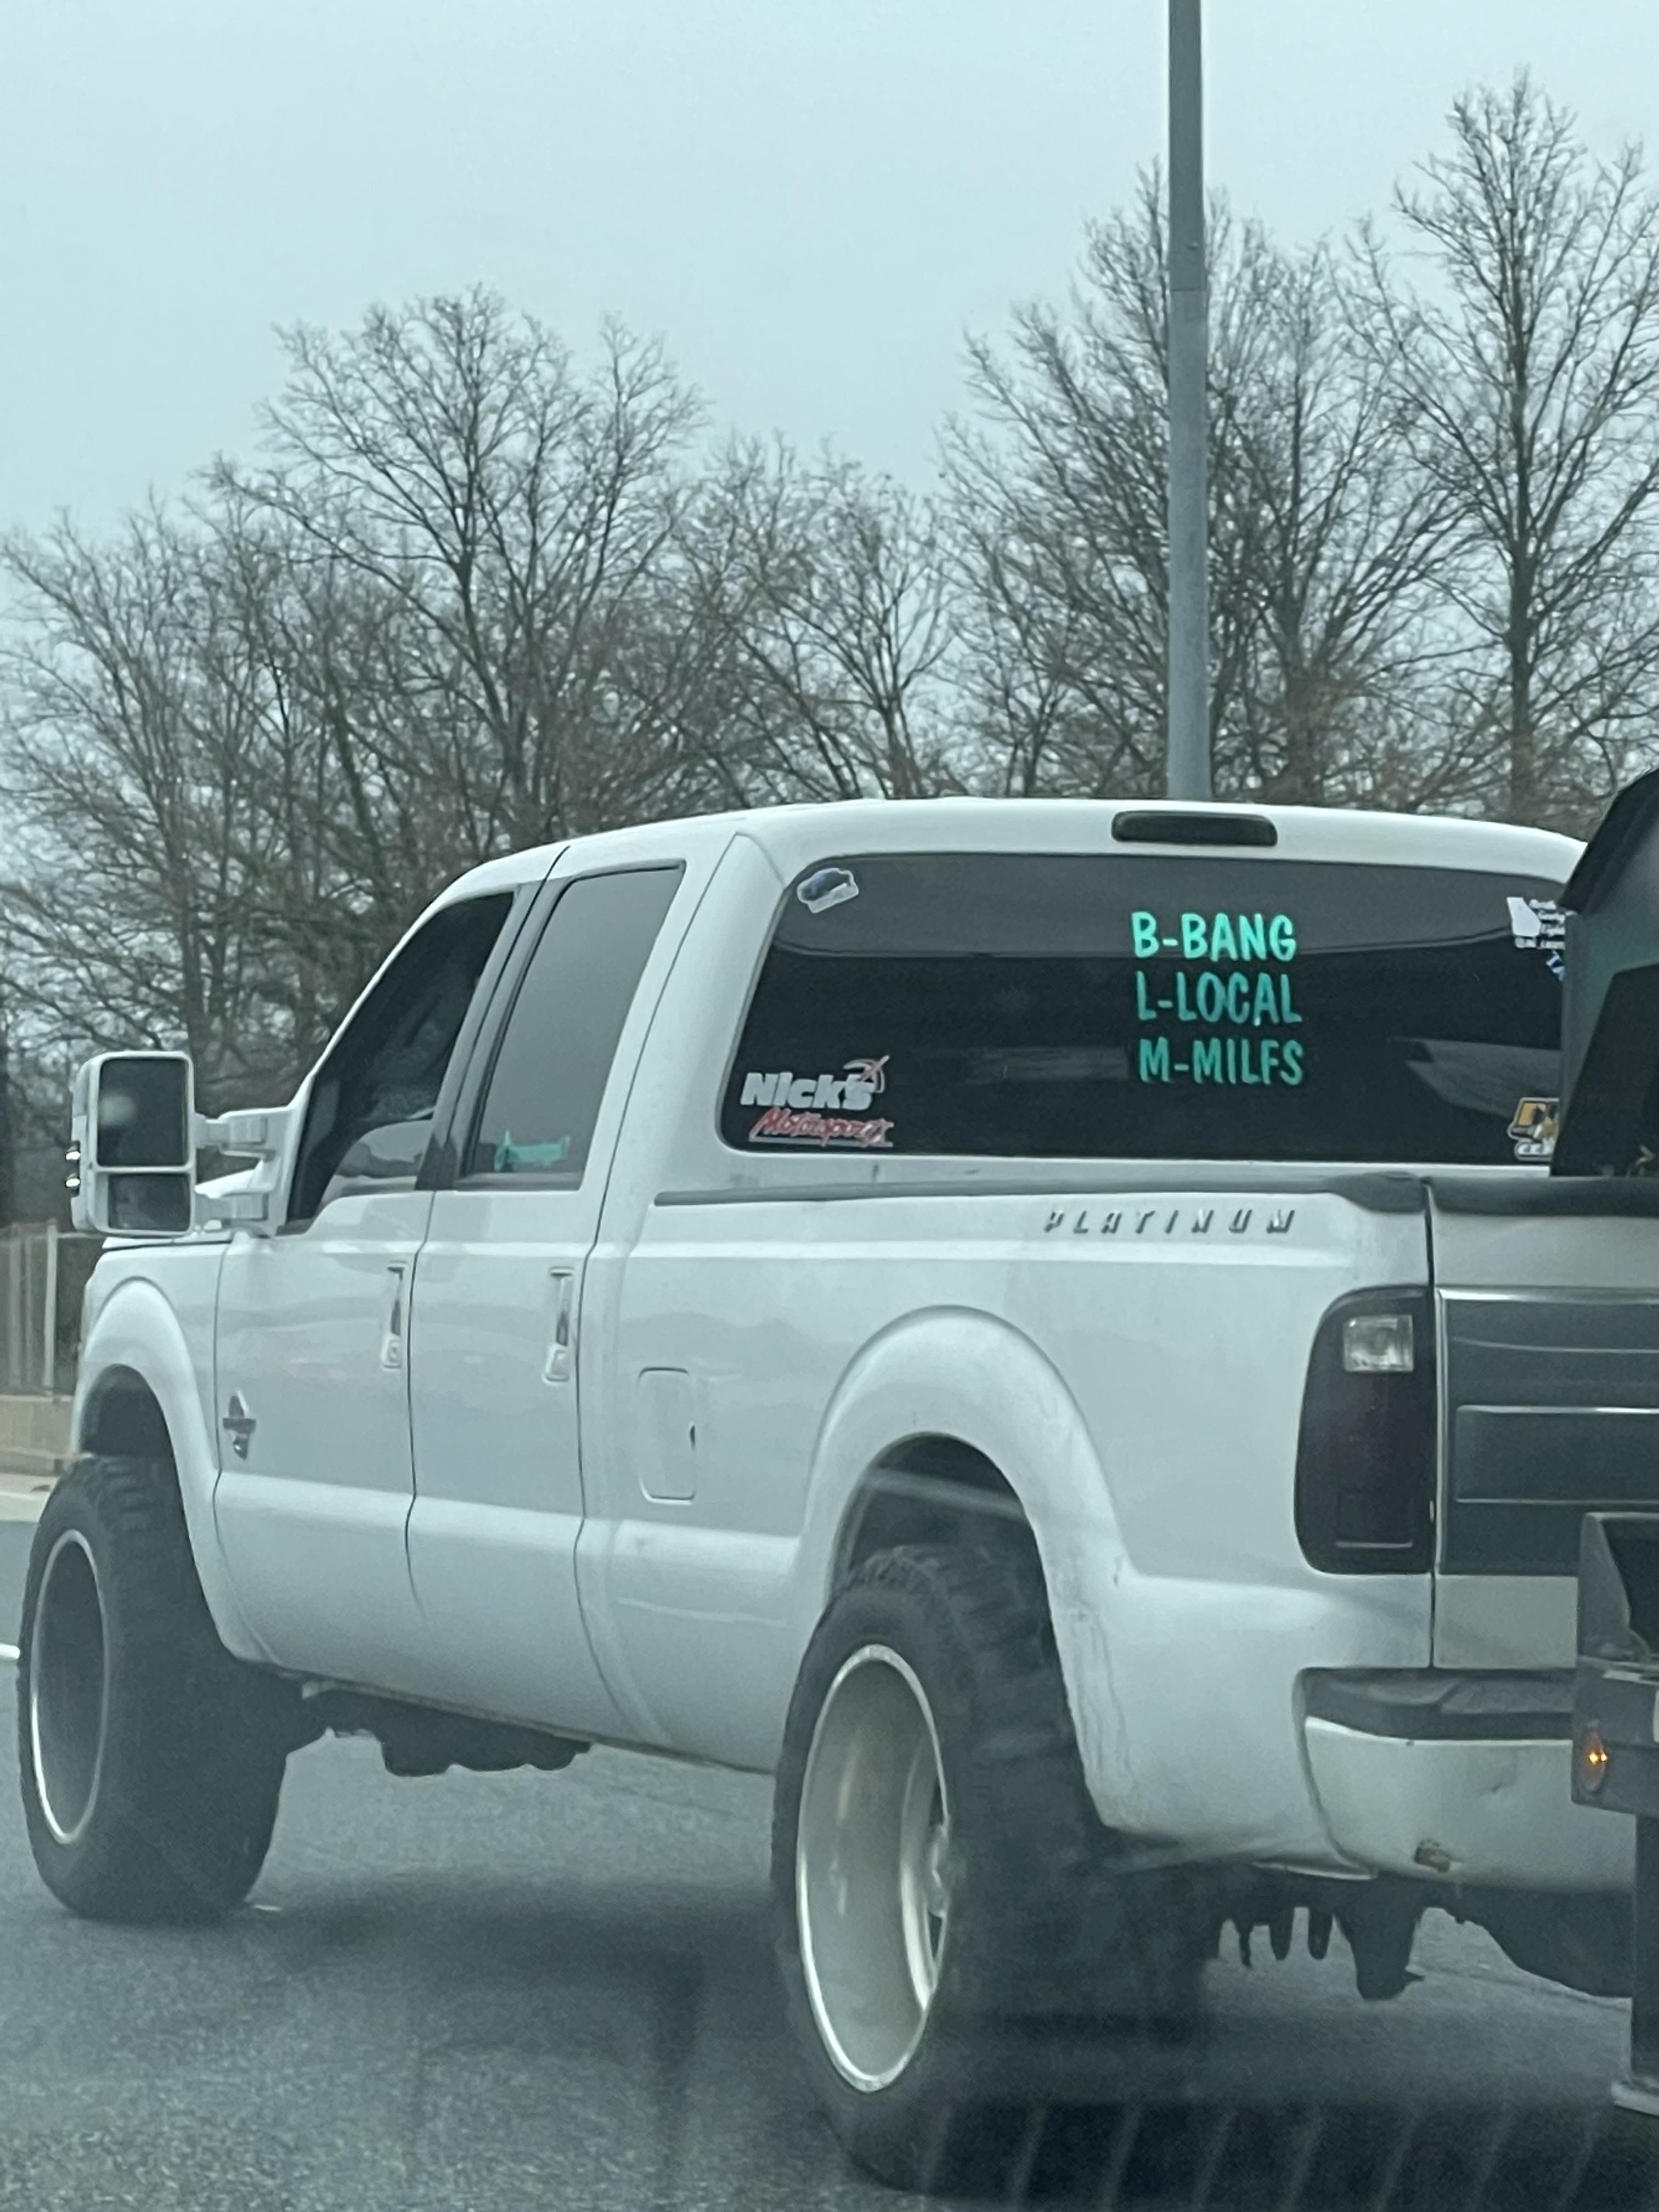 Spotted on the Baltimore beltway today